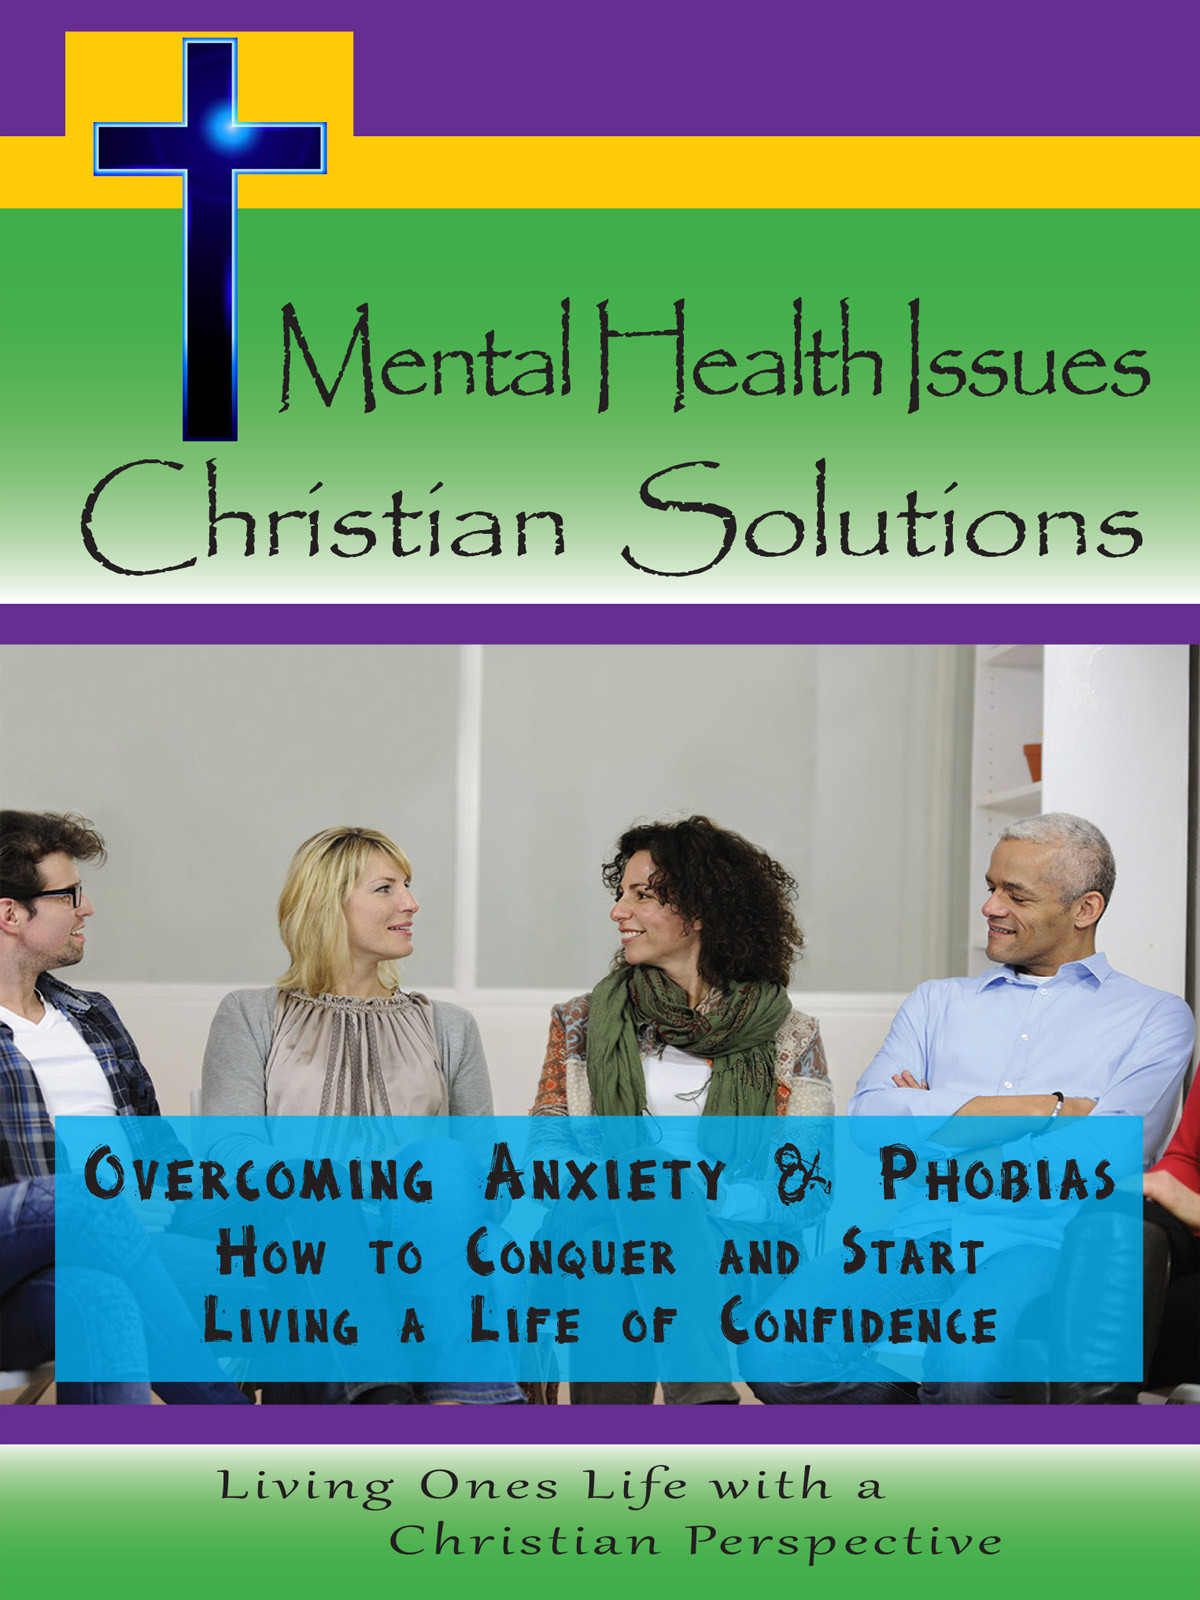 CH10010 - Overcoming Anxiety and Phobias How to Conquer and Start Living a Life of Confidence